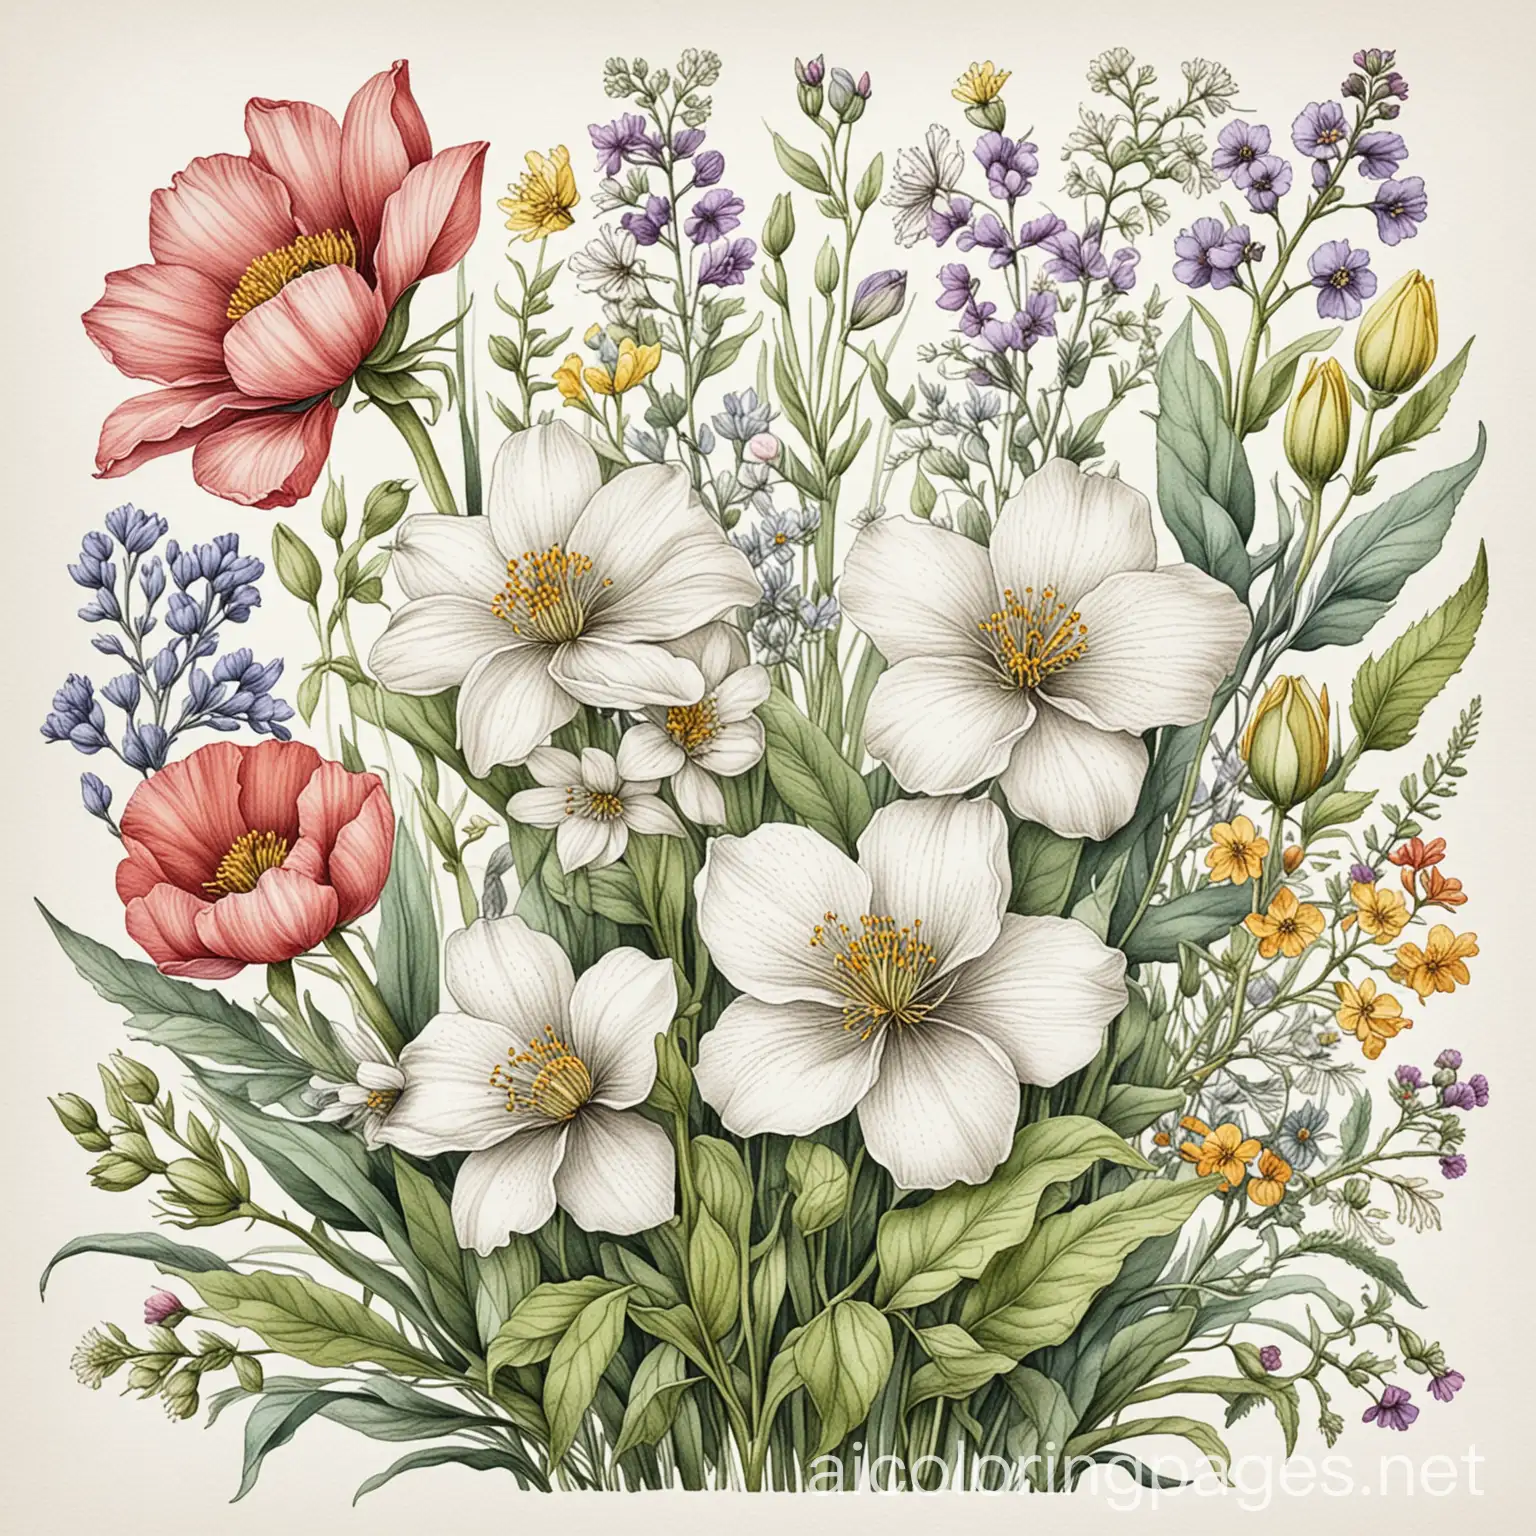 Vintage beautiful colour Spring Flowers Botanical watercolour Illustration, Coloring Page, black and white, line art, white background, Simplicity, Ample White Space. The background of the coloring page is plain white to make it easy for young children to color within the lines. The outlines of all the subjects are easy to distinguish, making it simple for kids to color without too much difficulty